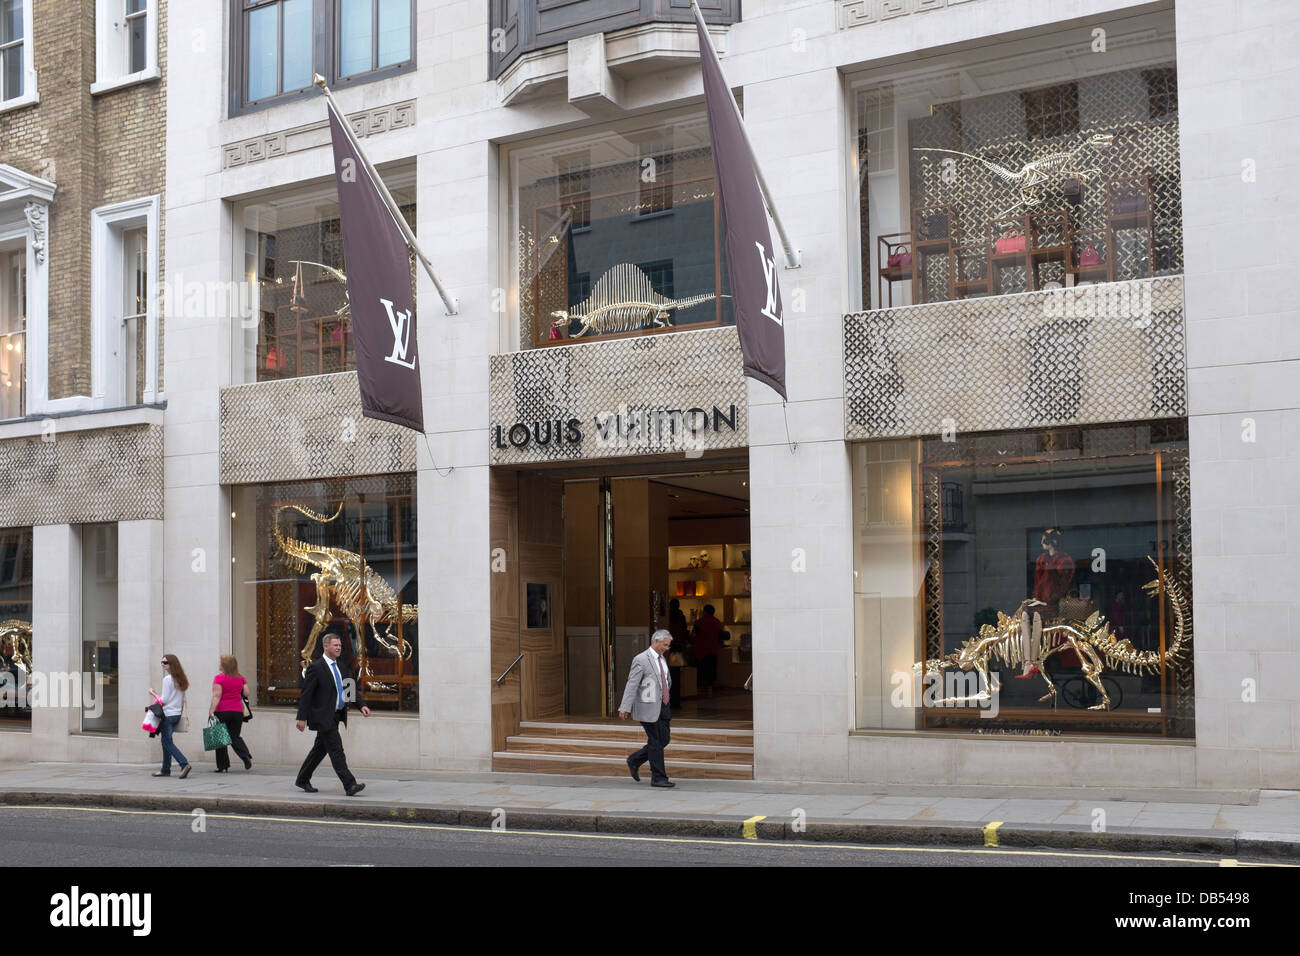 Louis Vuitton Luxury Shop in New Bond Street, London, United Kingdom  Editorial Stock Photo - Image of capucines, louis: 168151988